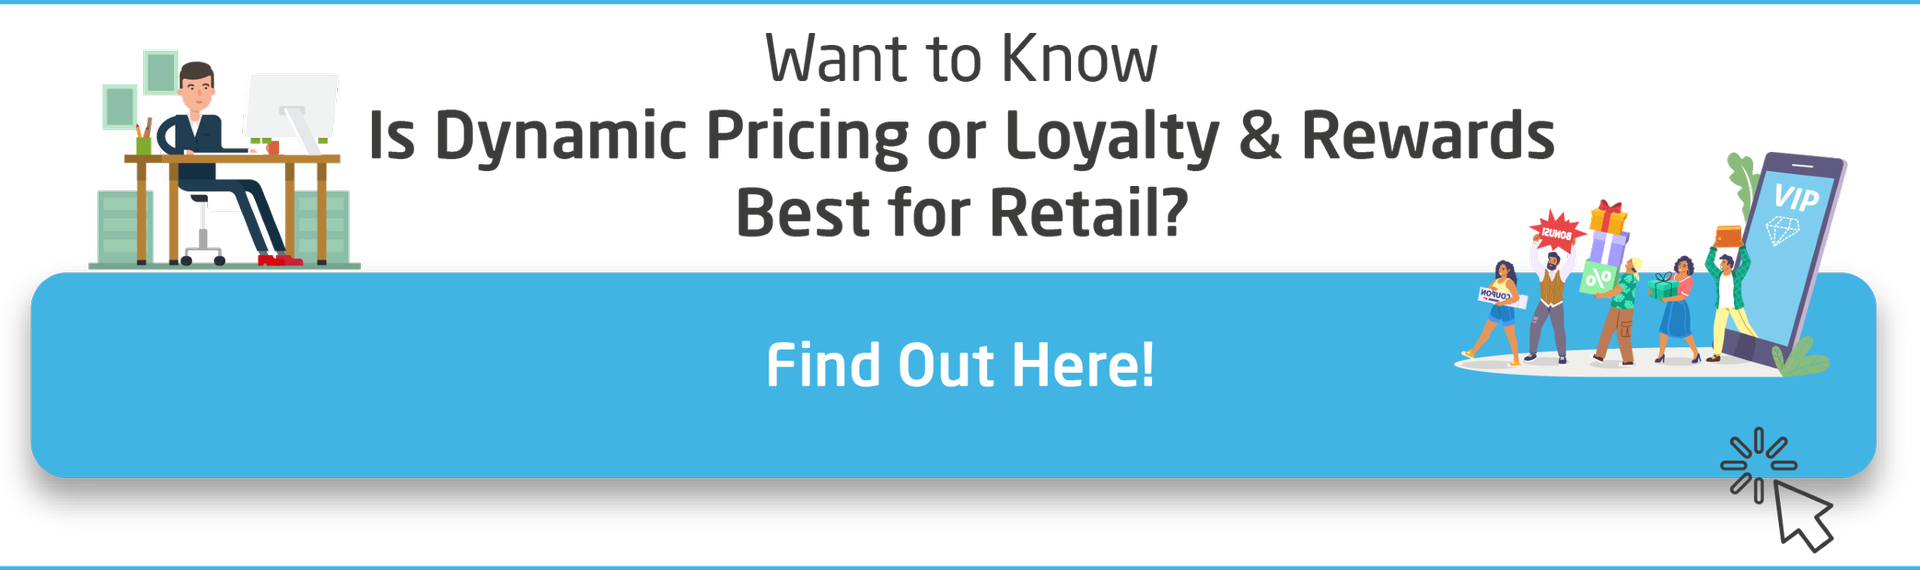 CTA-Is-Dynamic-Pricing-or-Loyalty-and-Rewards-best-for-the-Retail-Industry